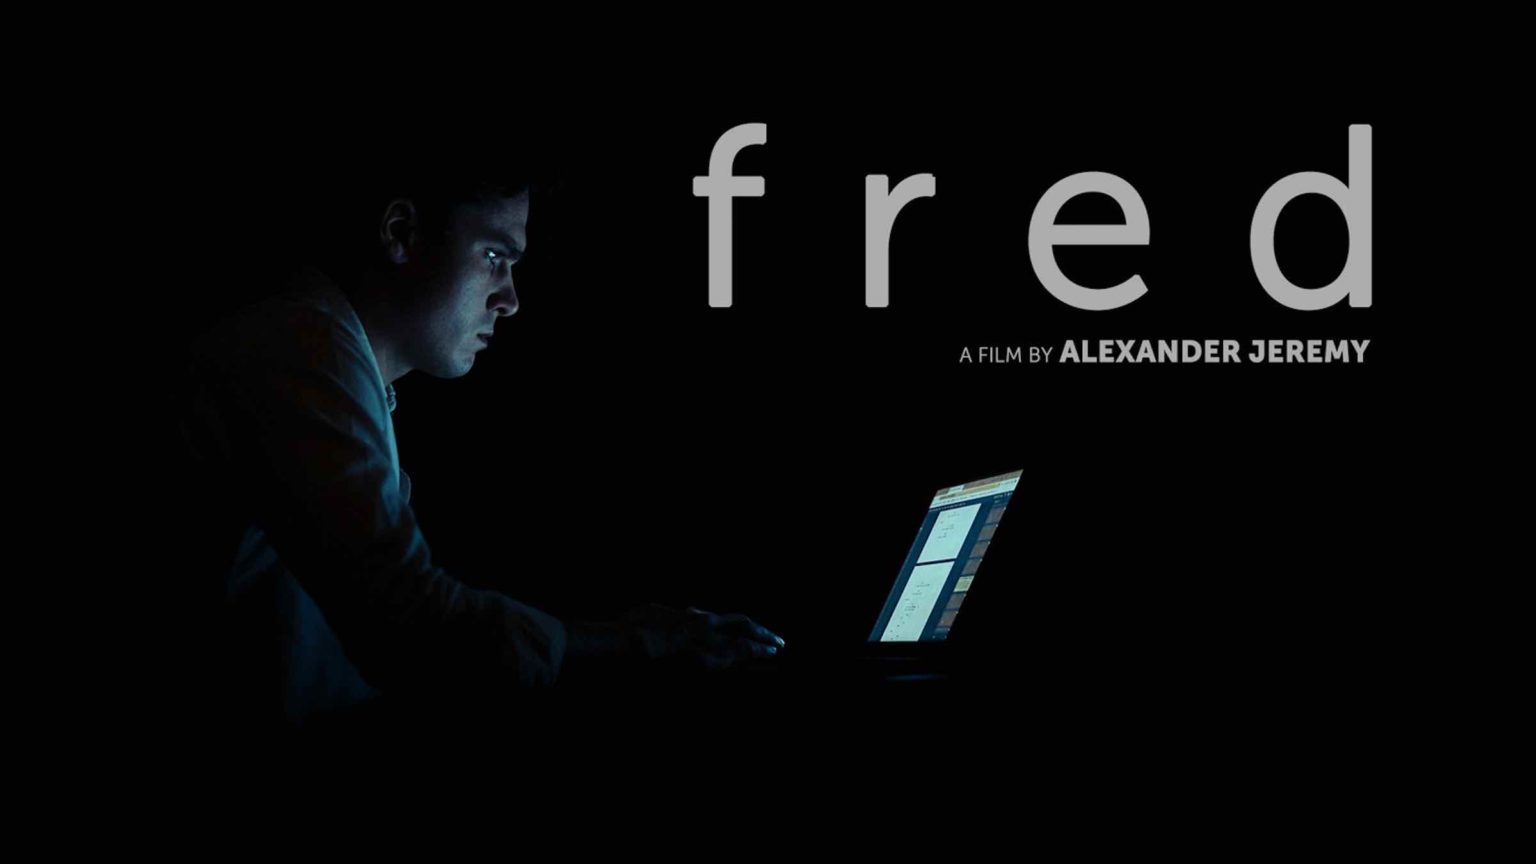 Hailing from filmmaker Alexander Jeremy, 'f r e d' is a look at grief. Here's everything you need to know about 'f r e d' and filmmaker Alexander Jeremy.